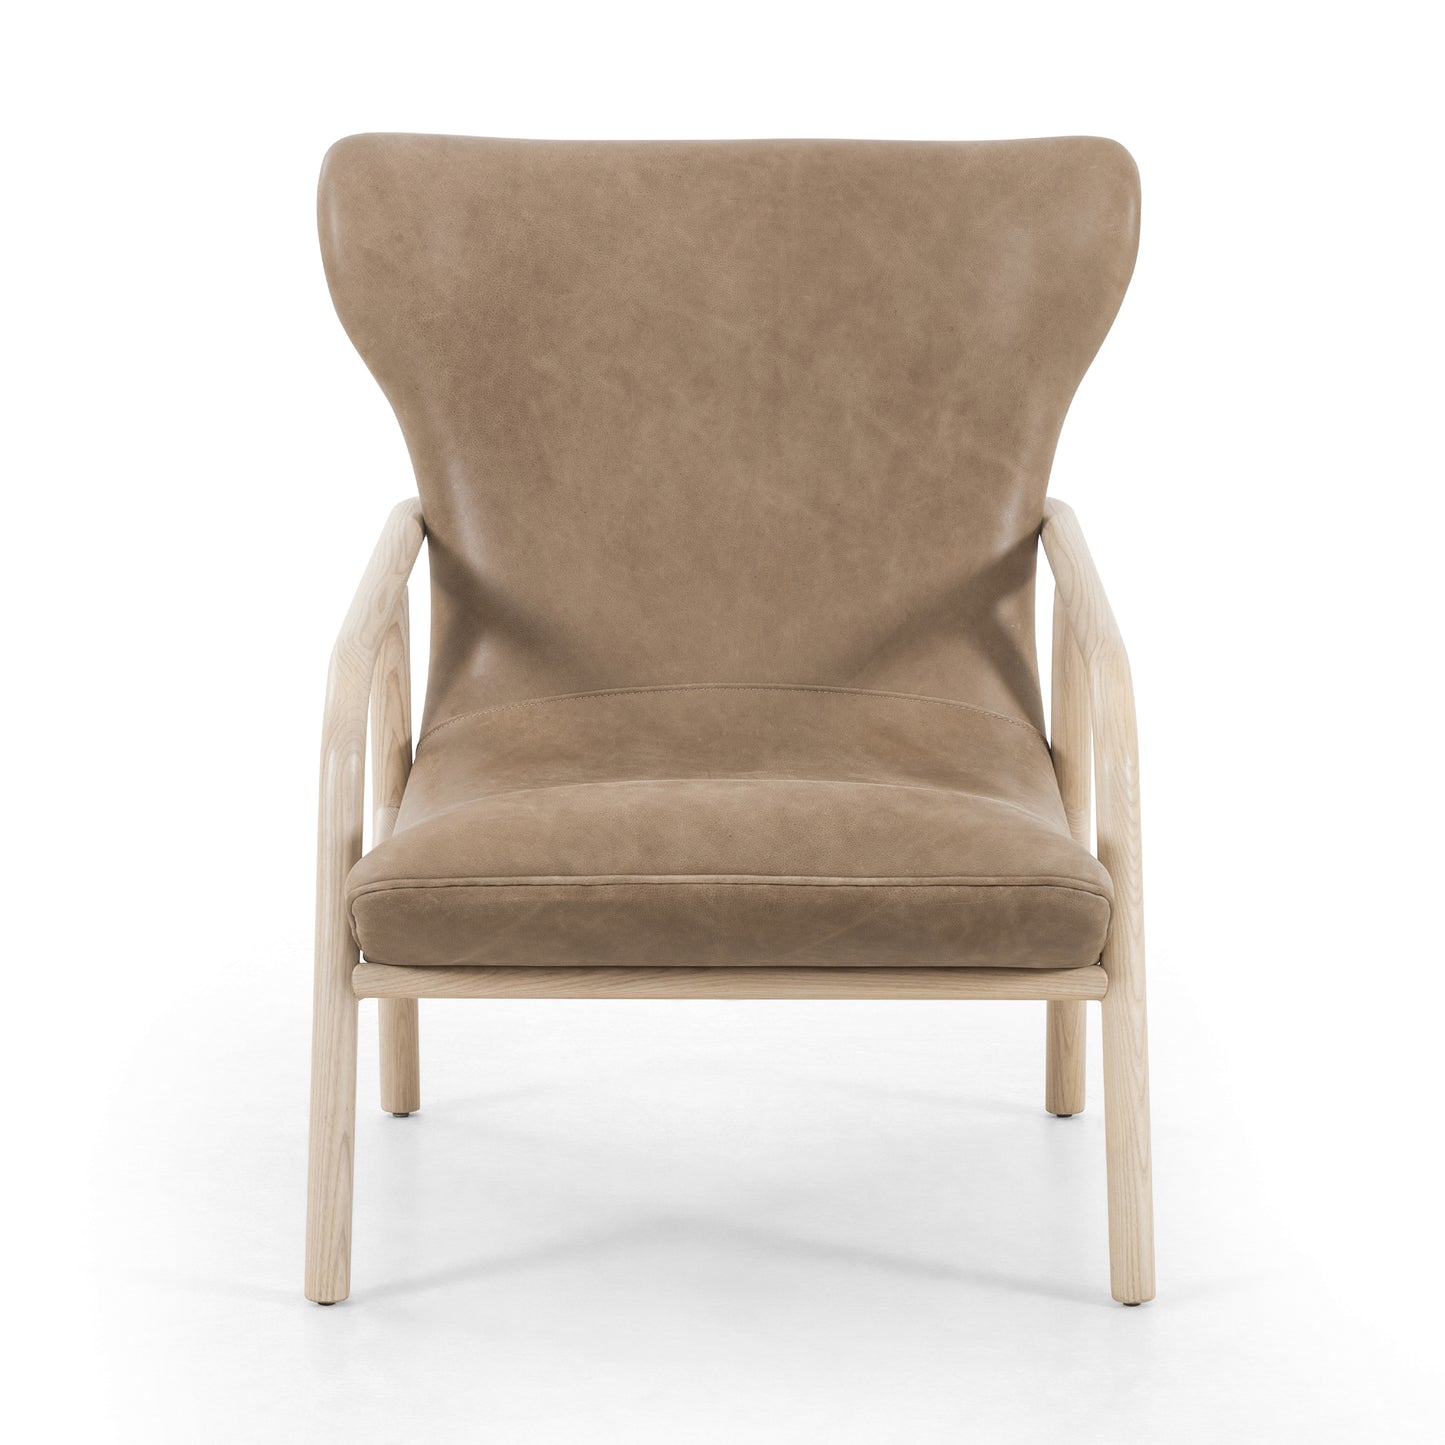 Load image into Gallery viewer, Vance Chair Lounge Chair Four Hands     Four Hands, Mid Century Modern Furniture, Old Bones Furniture Company, Old Bones Co, Modern Mid Century, Designer Furniture, https://www.oldbonesco.com/
